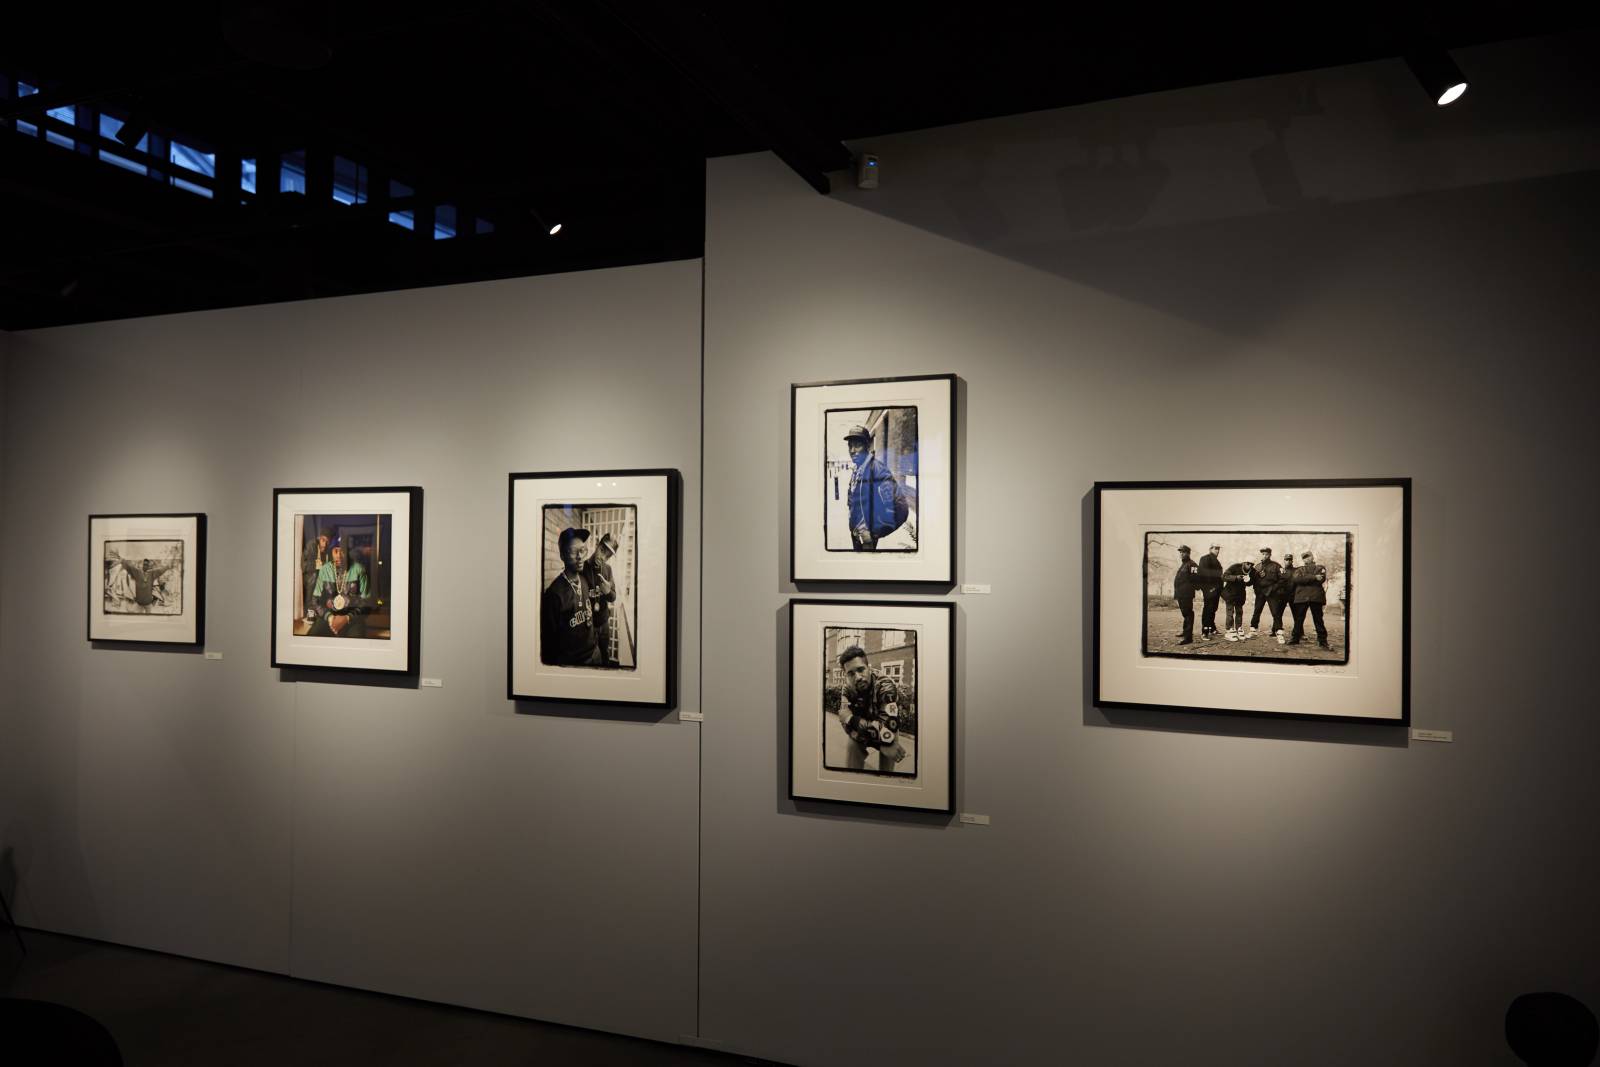 The History Of Hip Hop Culture, Fashion & Graffiti Brought To Life In Beat Positive Exhibit